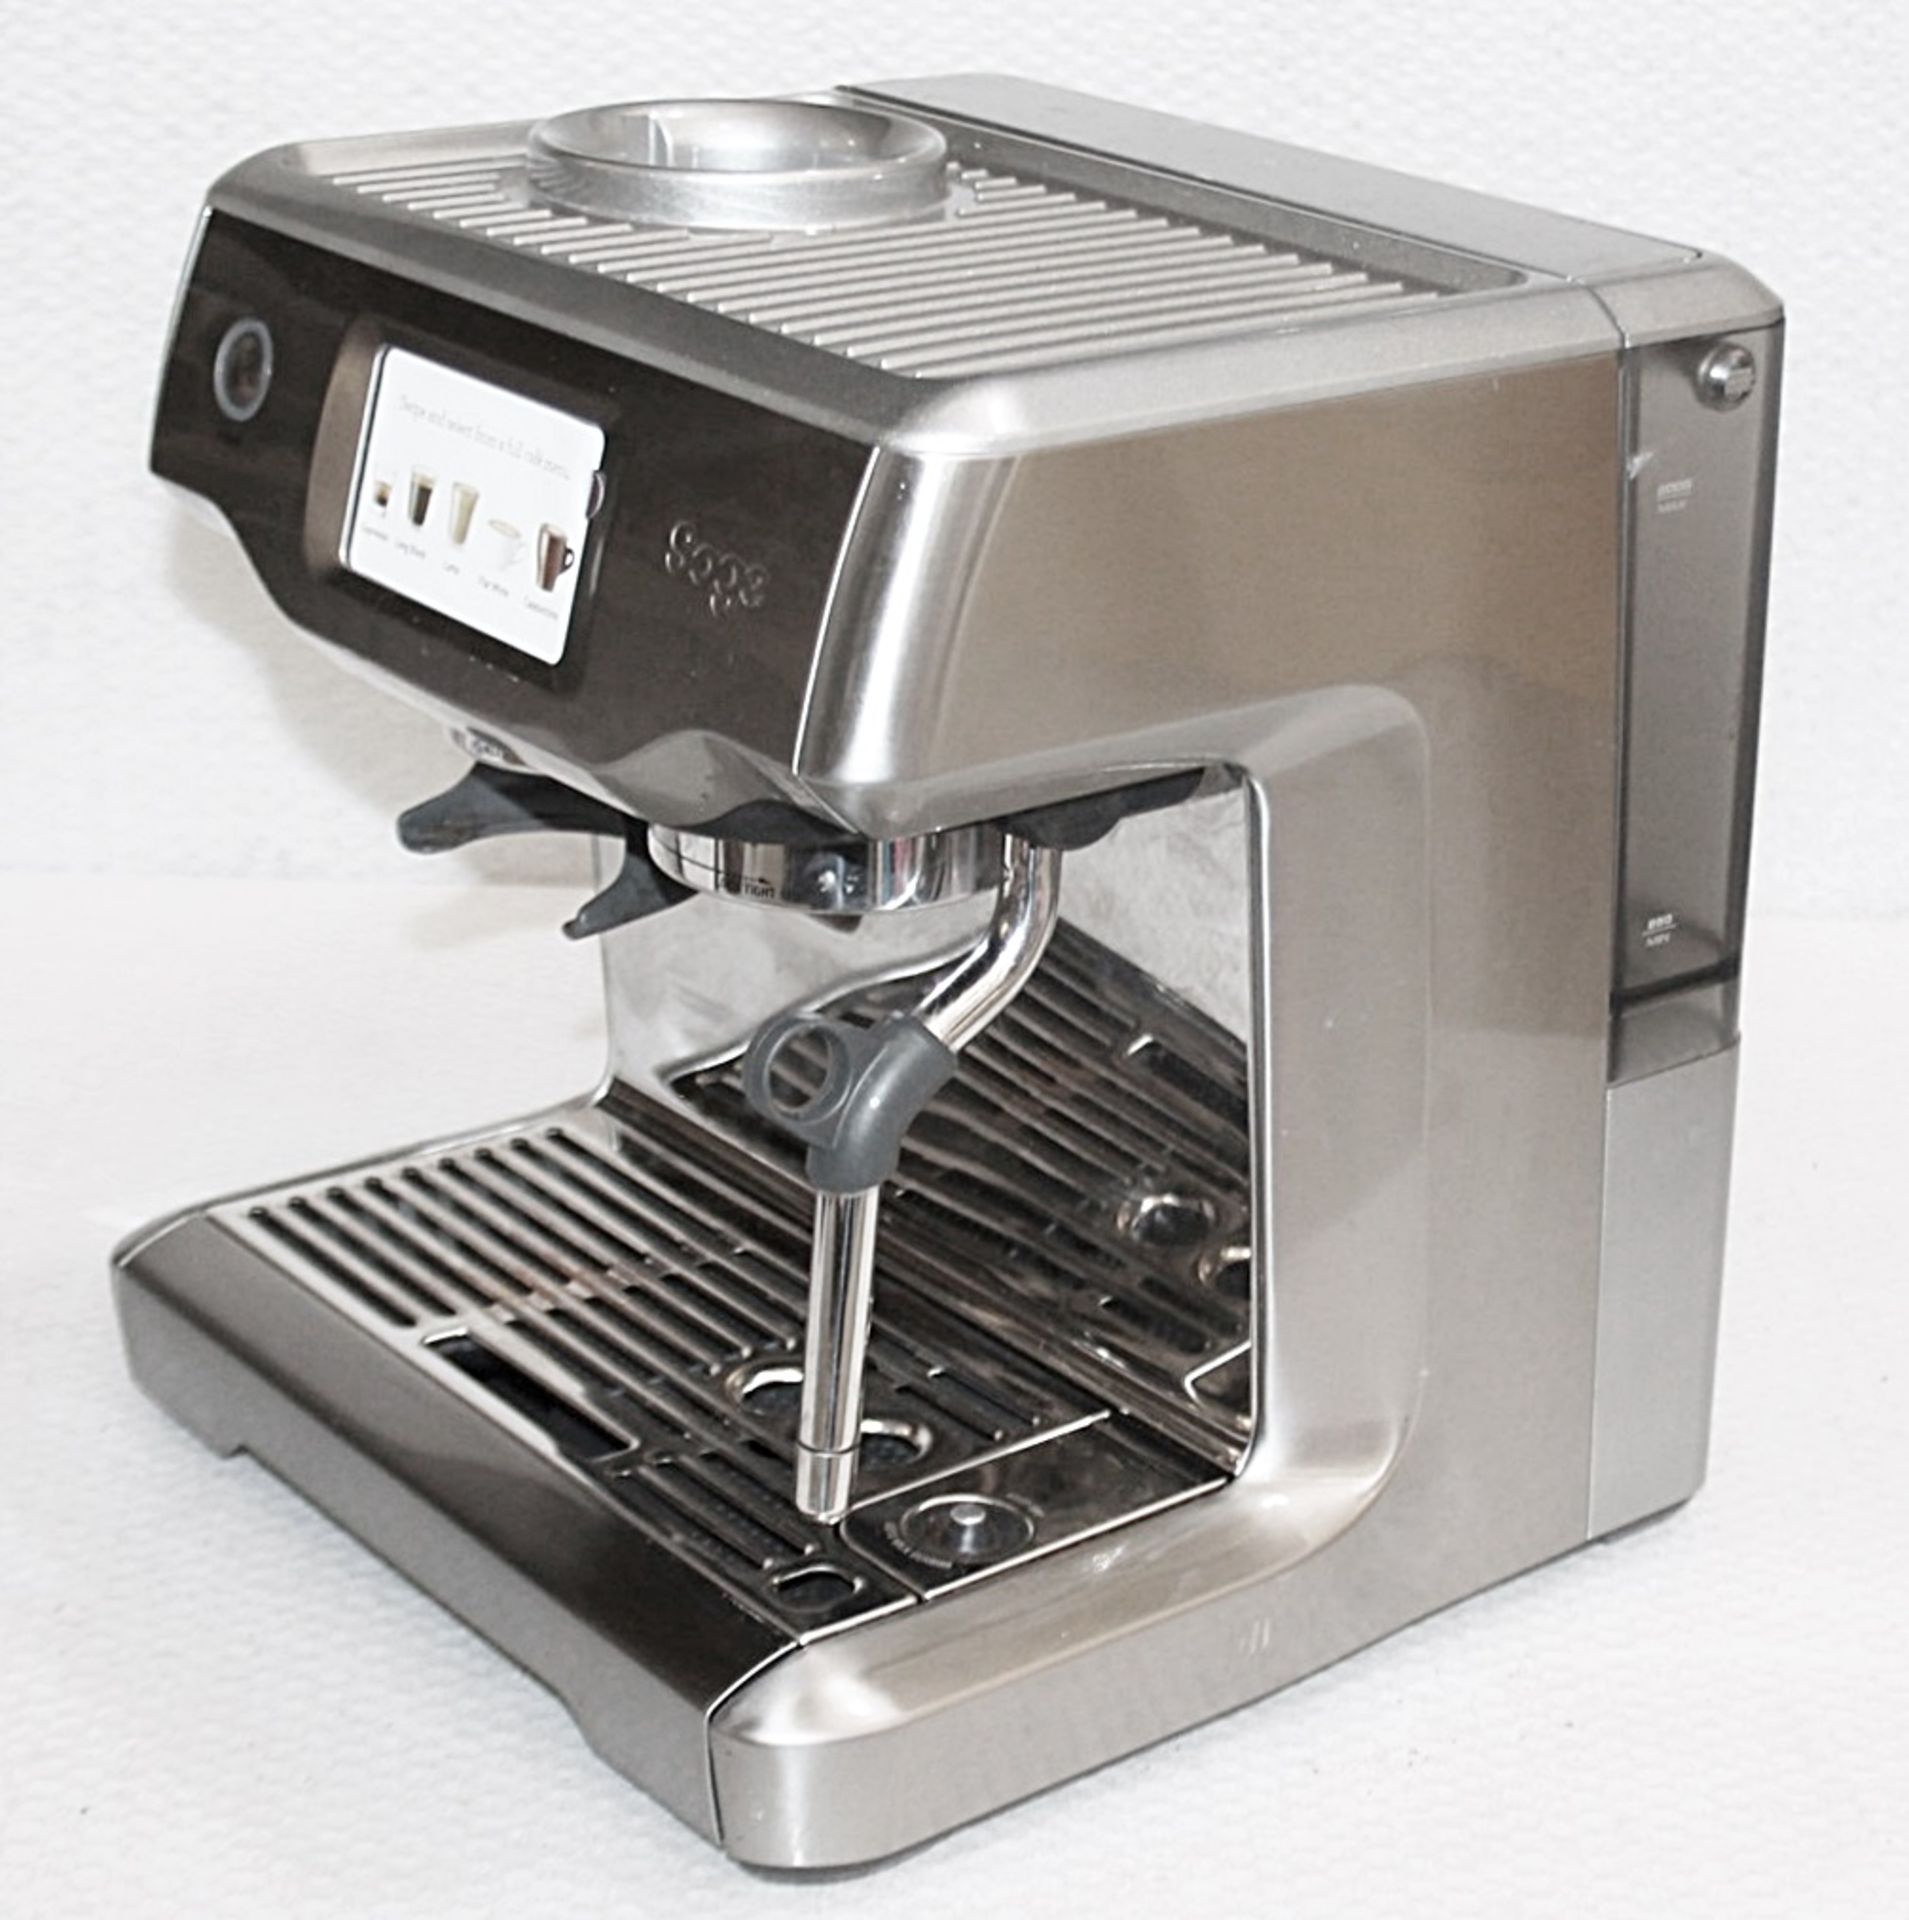 1 x SAGE The Barista Touch Coffee Machine - Original Price £1,049.95 *Read Condition Report* - Image 5 of 19